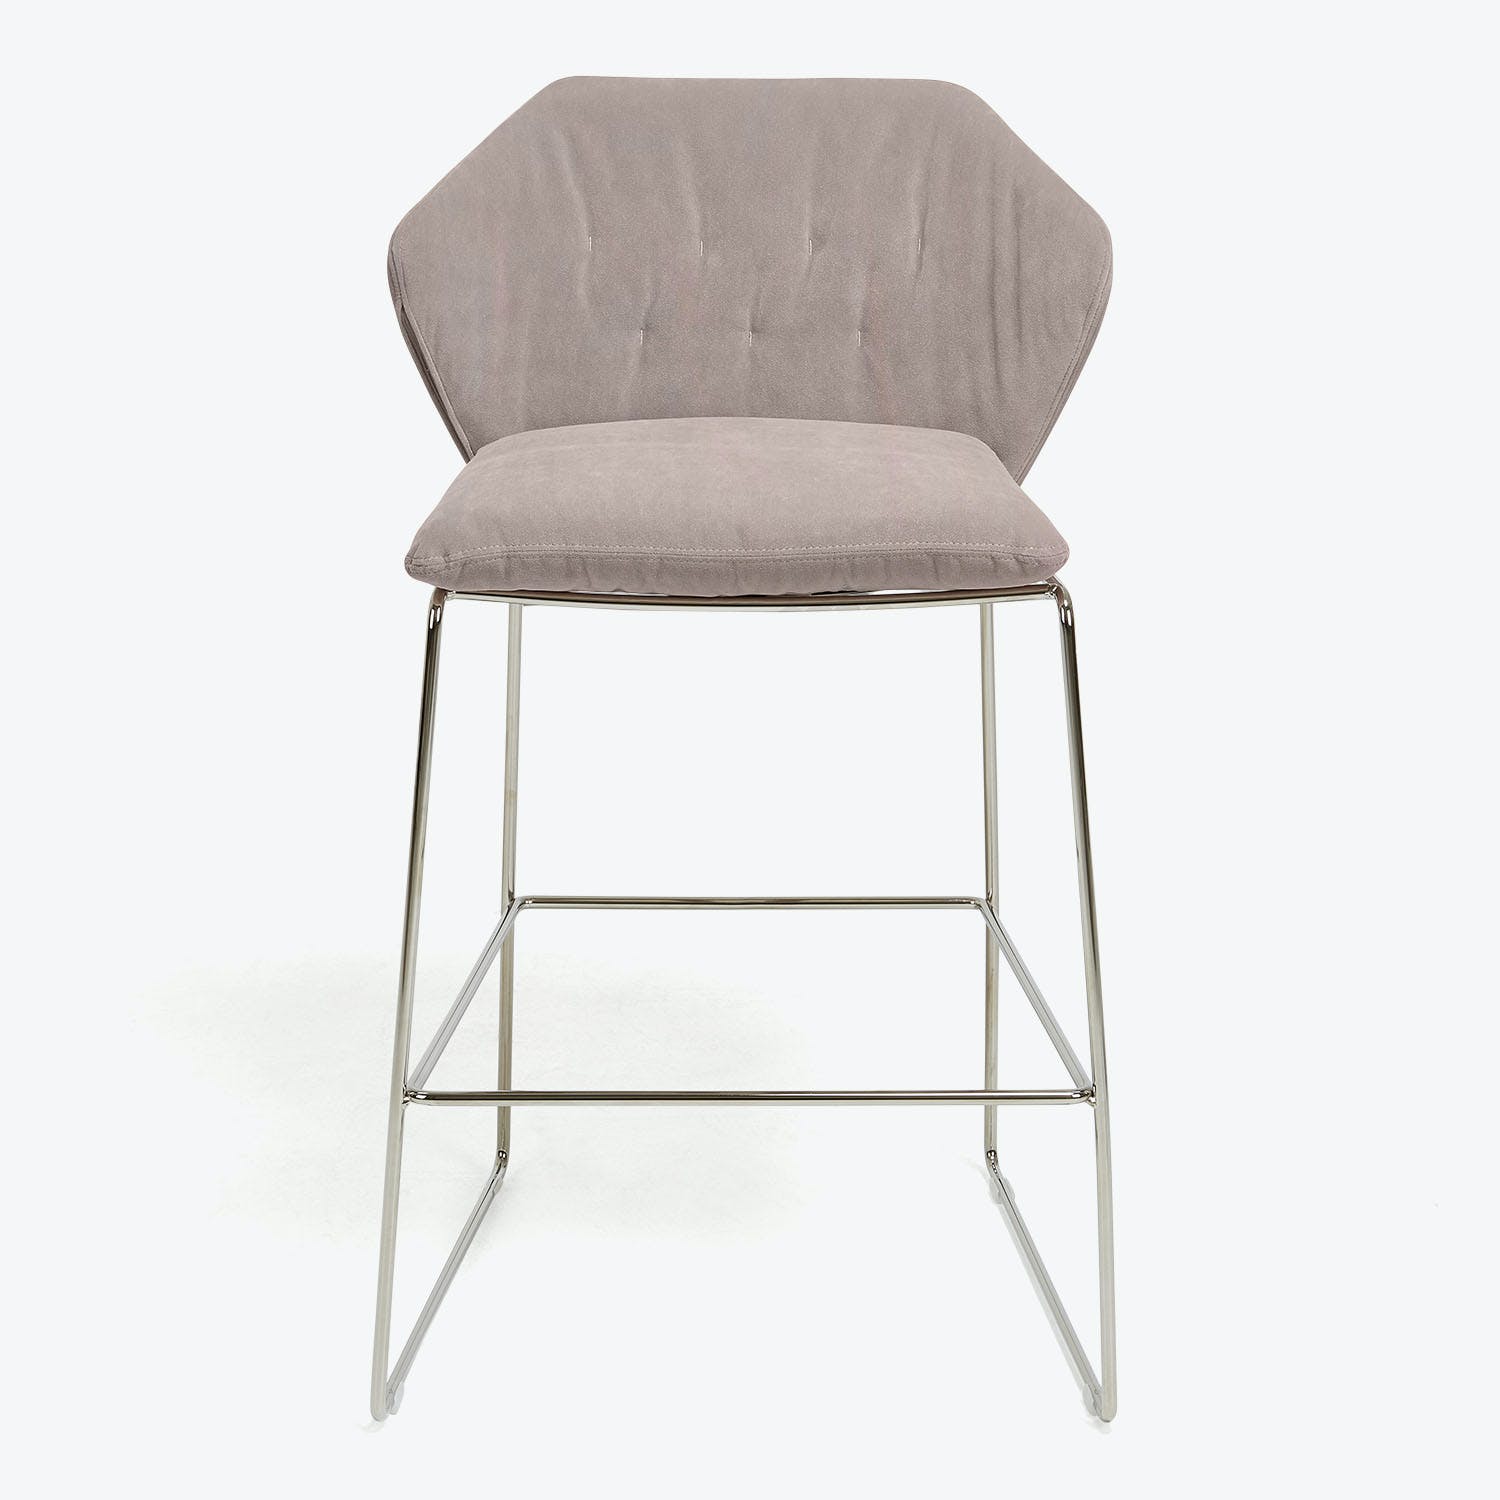 Modern bar stool with chrome frame and cushioned gray upholstery.